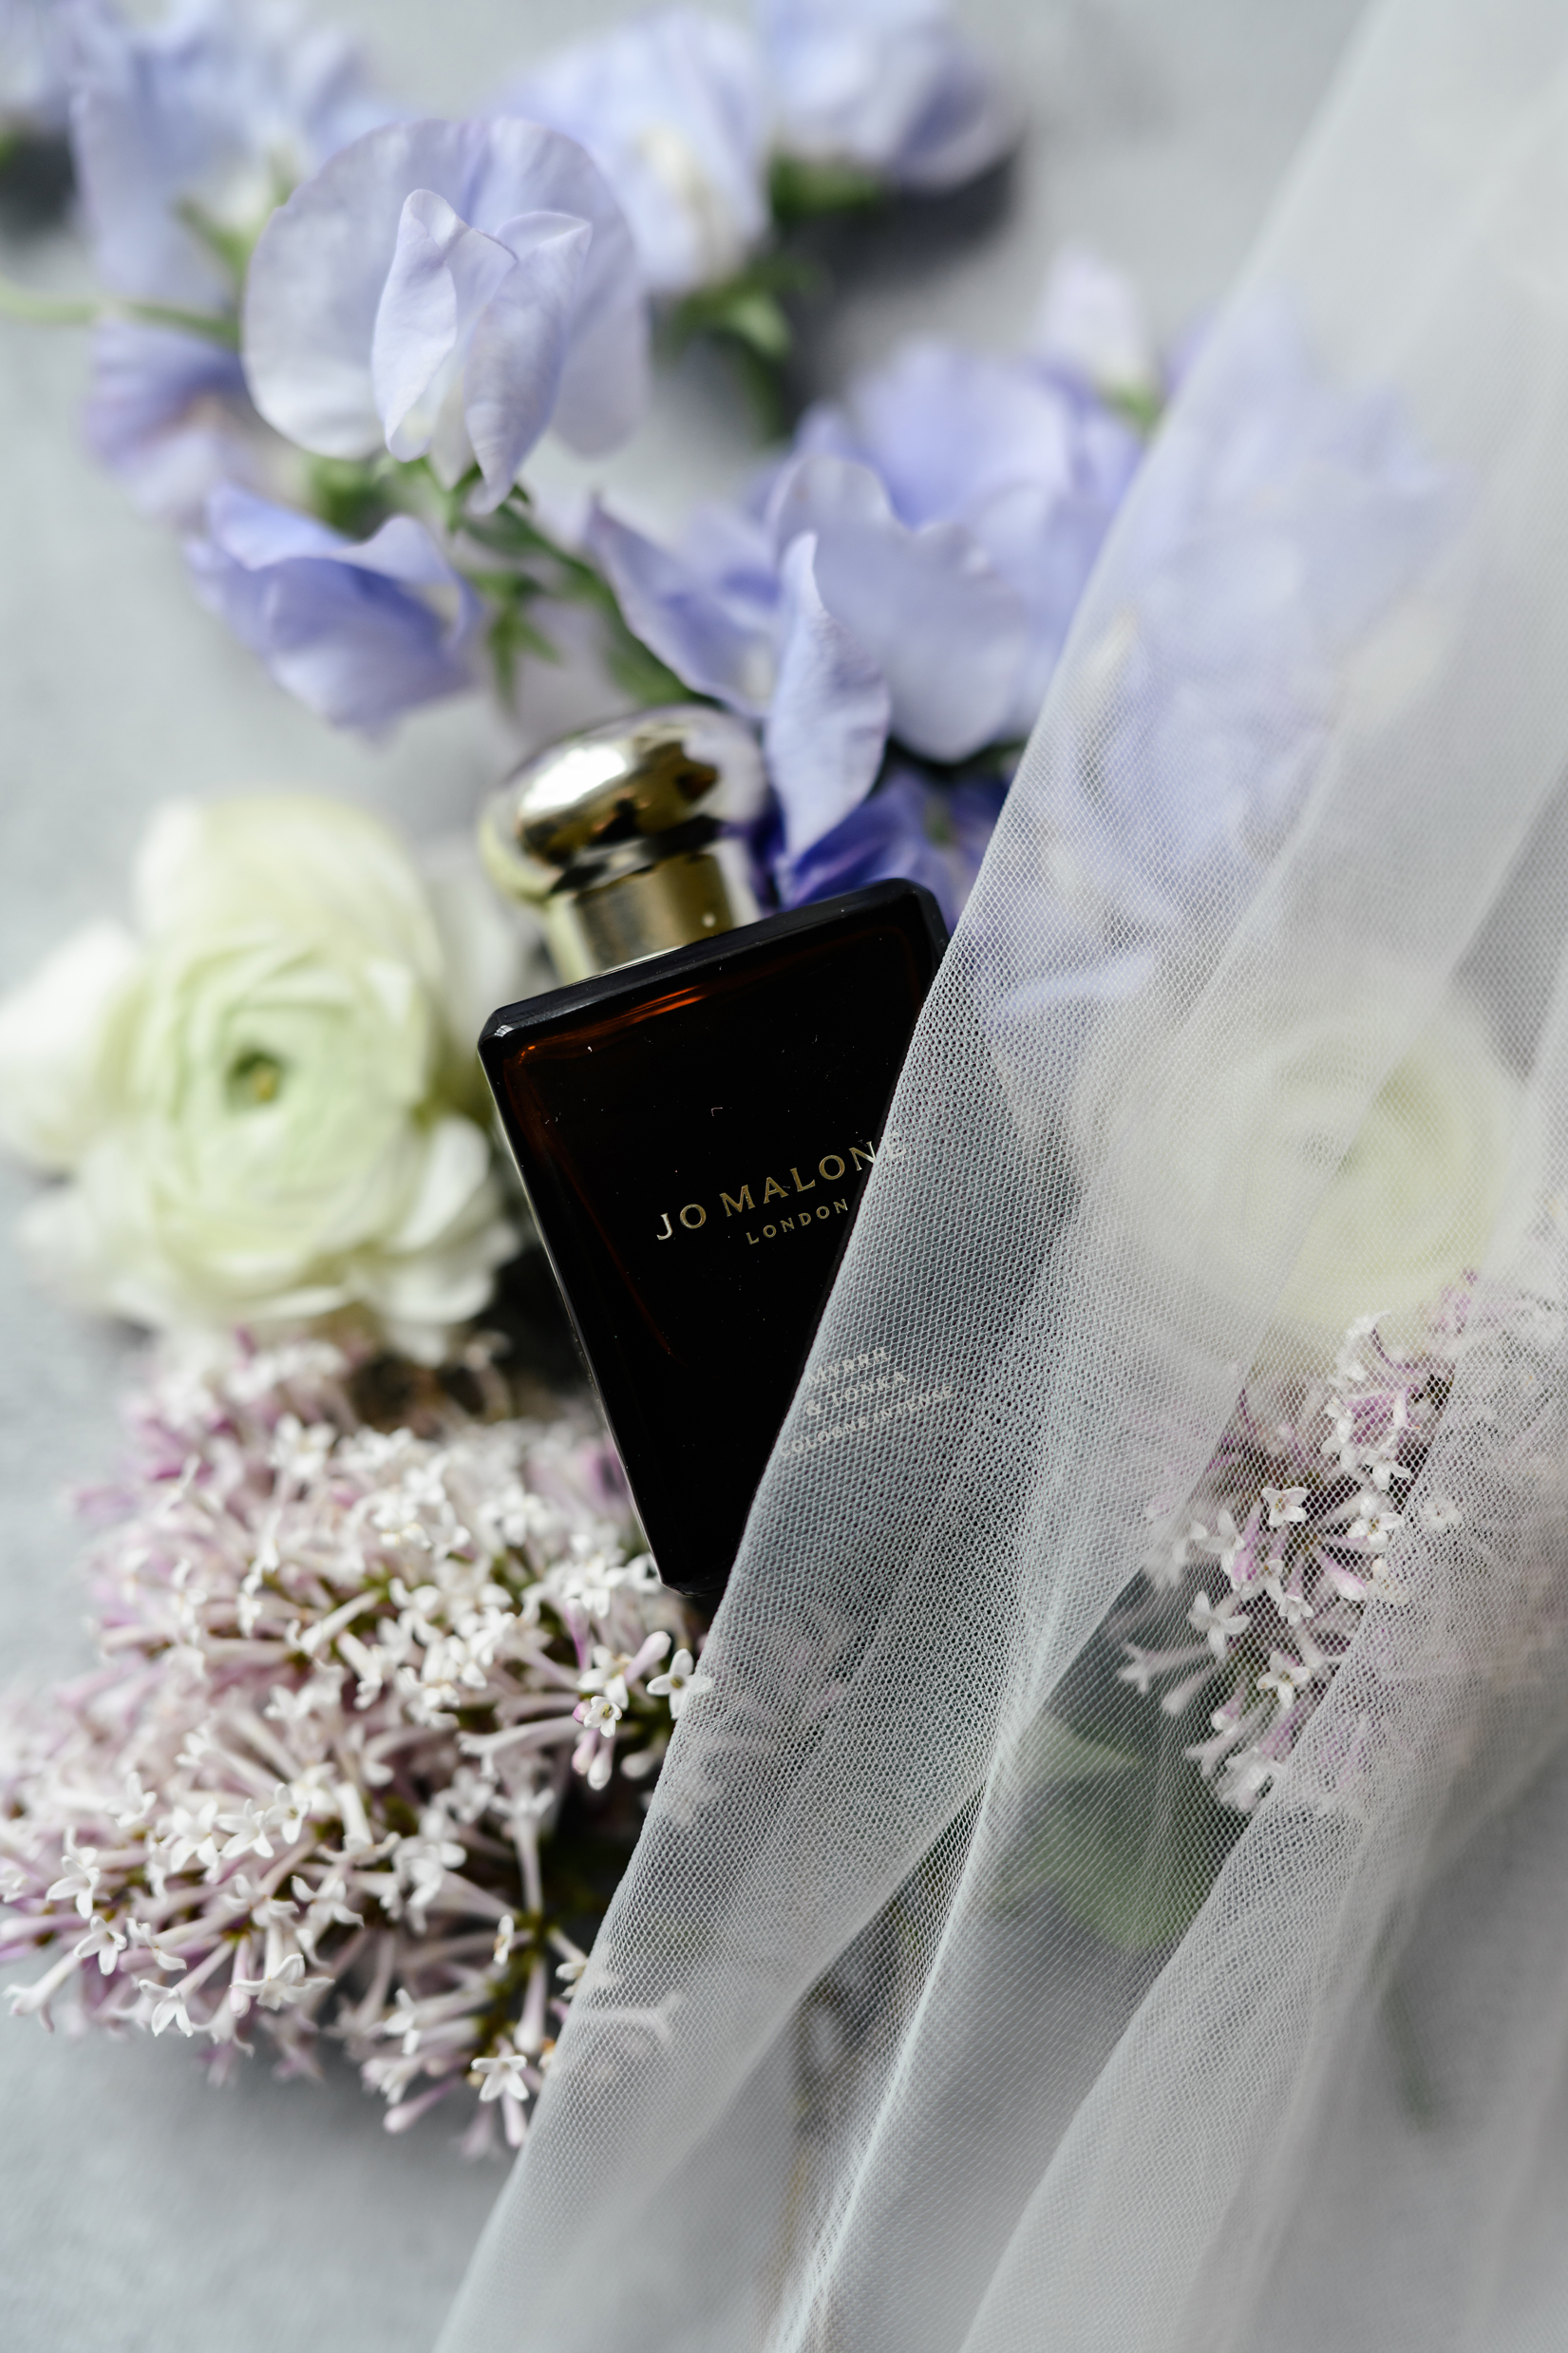 jo malone london on flowers with a veil